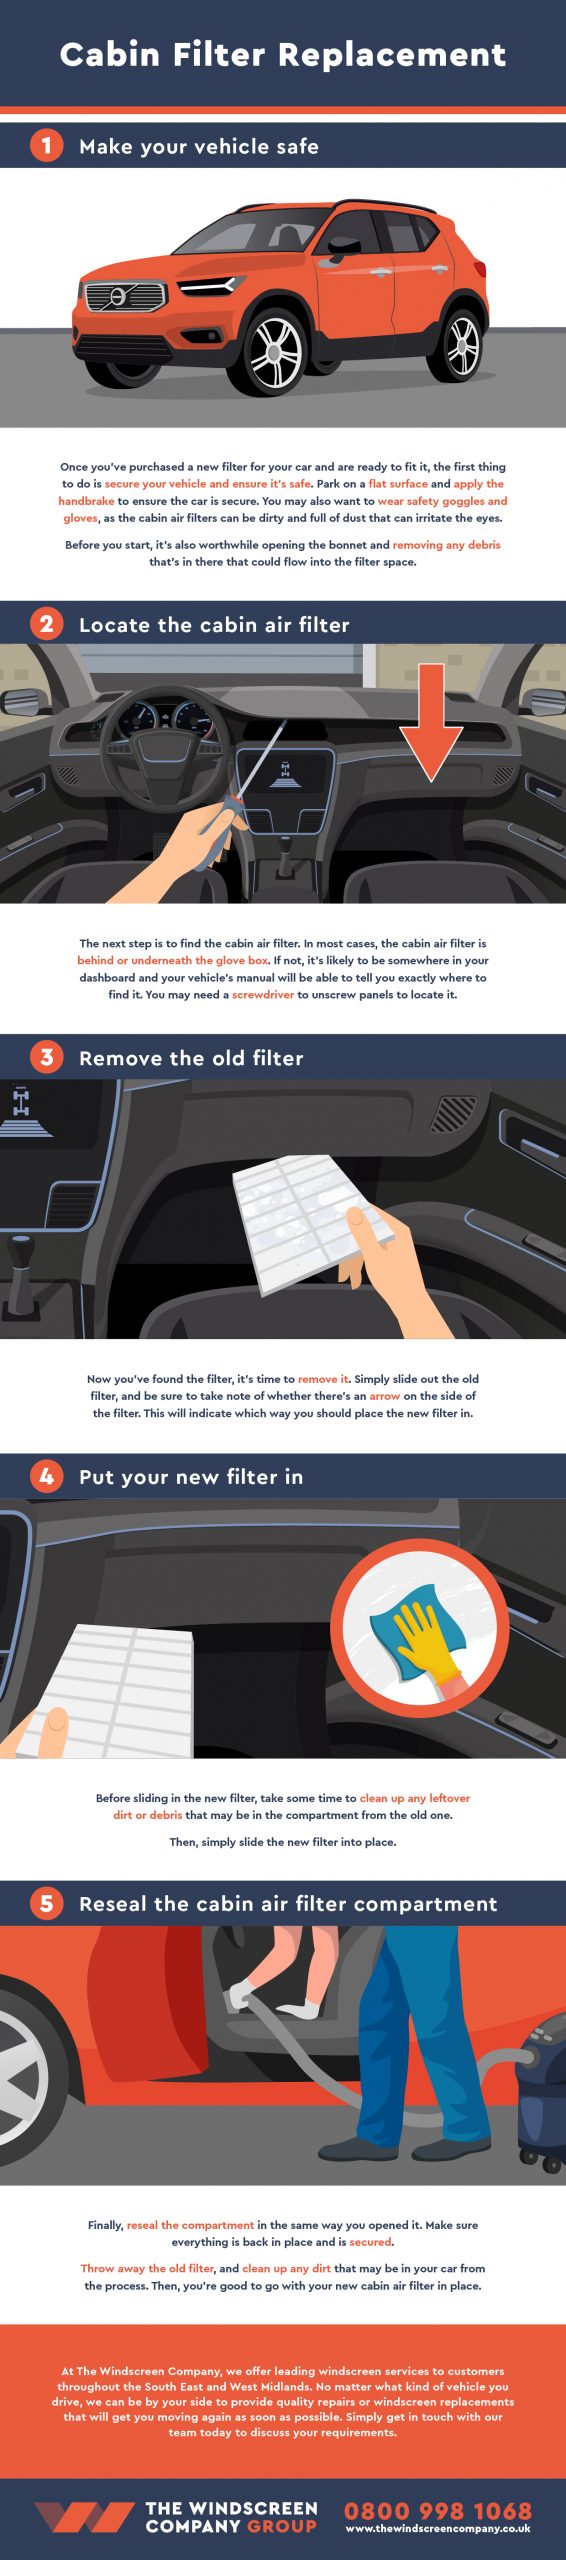 5 Reasons You Should Change Your Cabin Air Filter